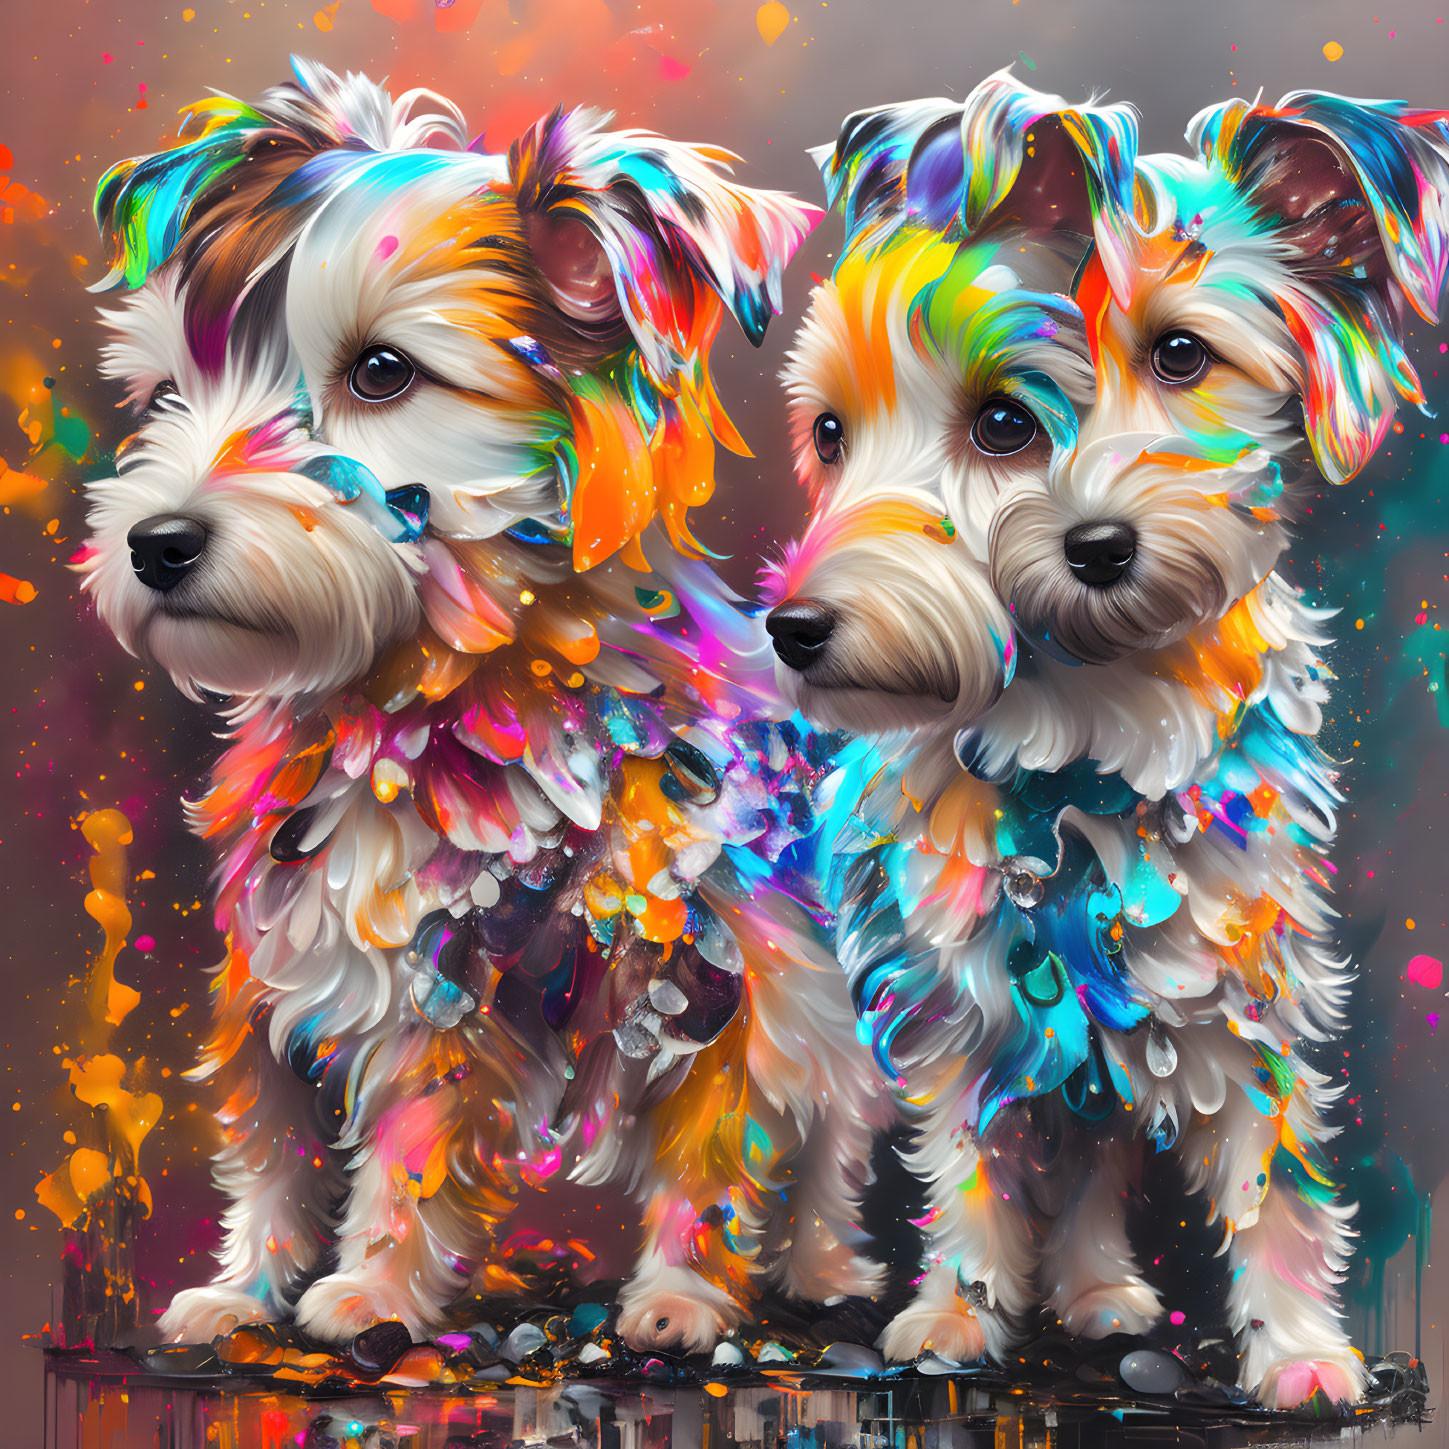 Illustrated Dogs with Expressive Eyes on Colorful Background